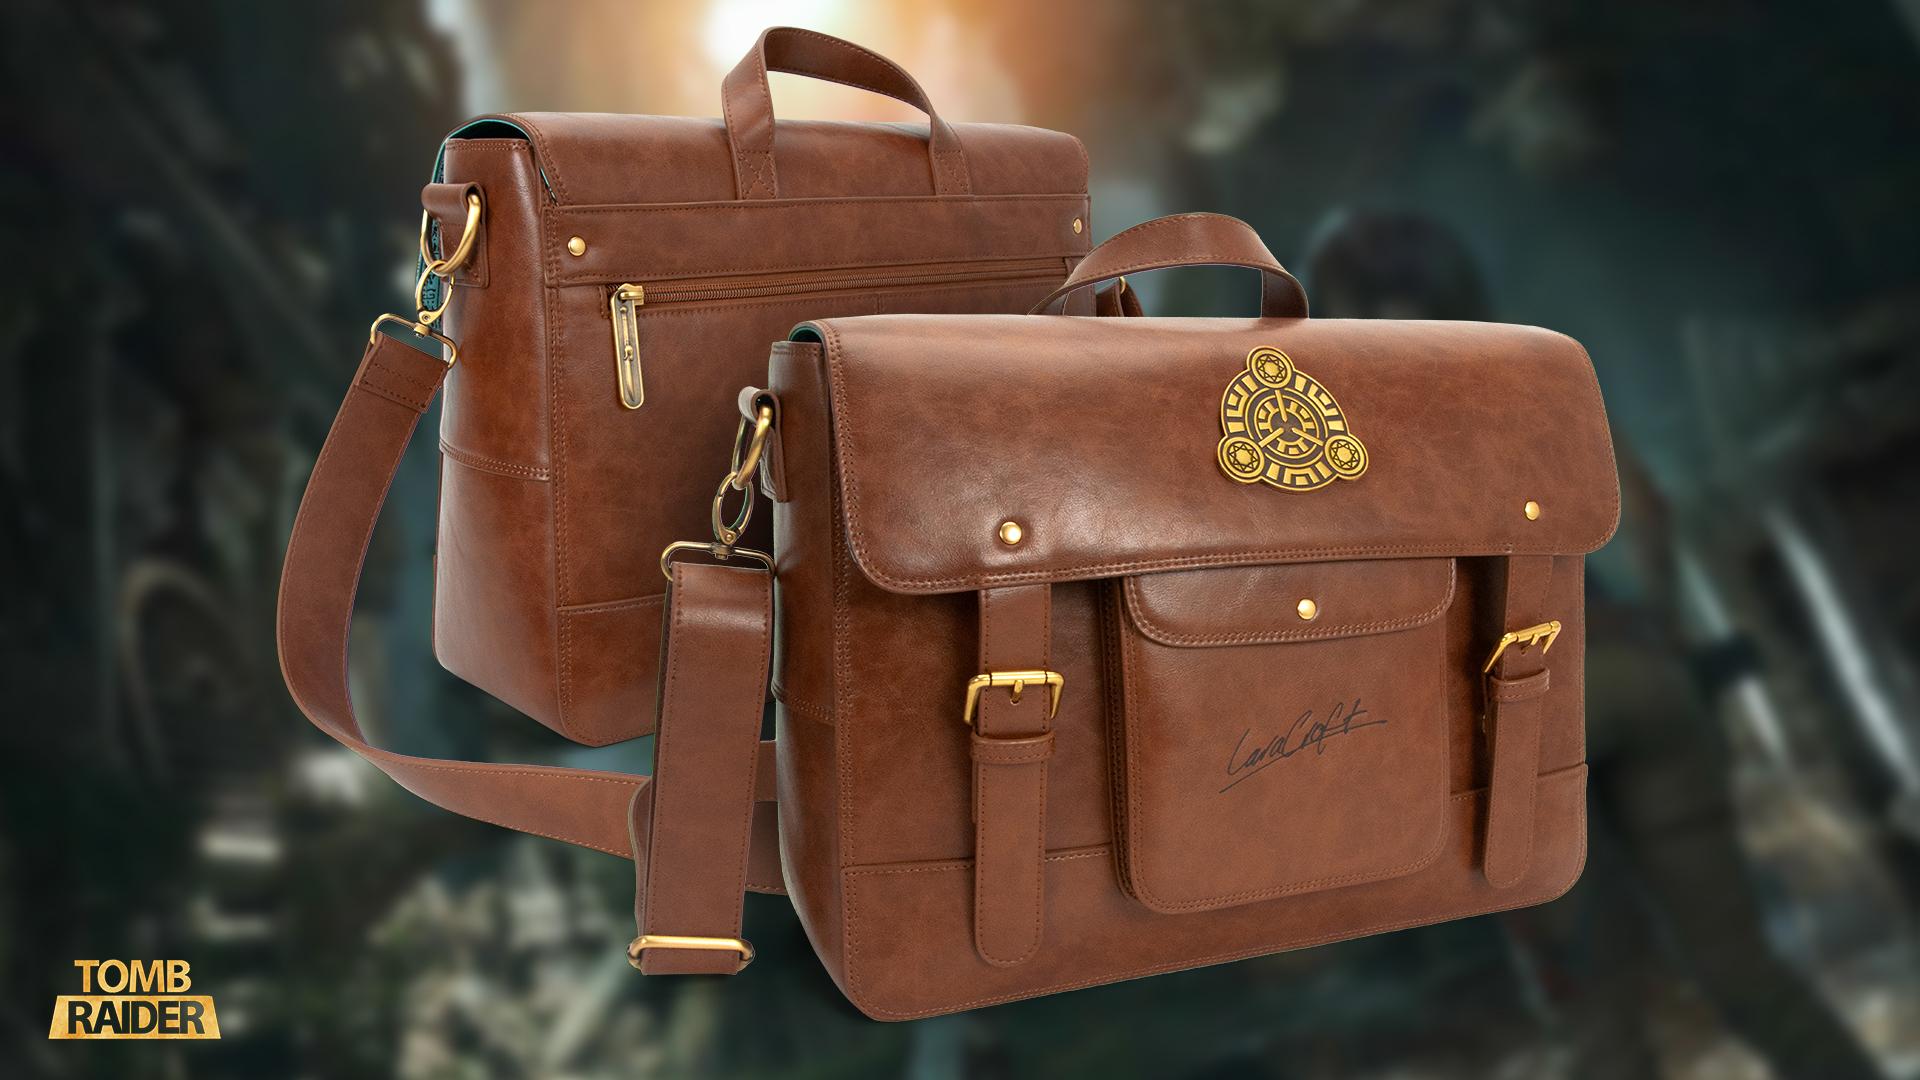 Tomb Raider Adventure Satchel
70% cowhide leather / 30% Polyester. Feat. Lara’s signature, the Atlantean Scion, and more.
